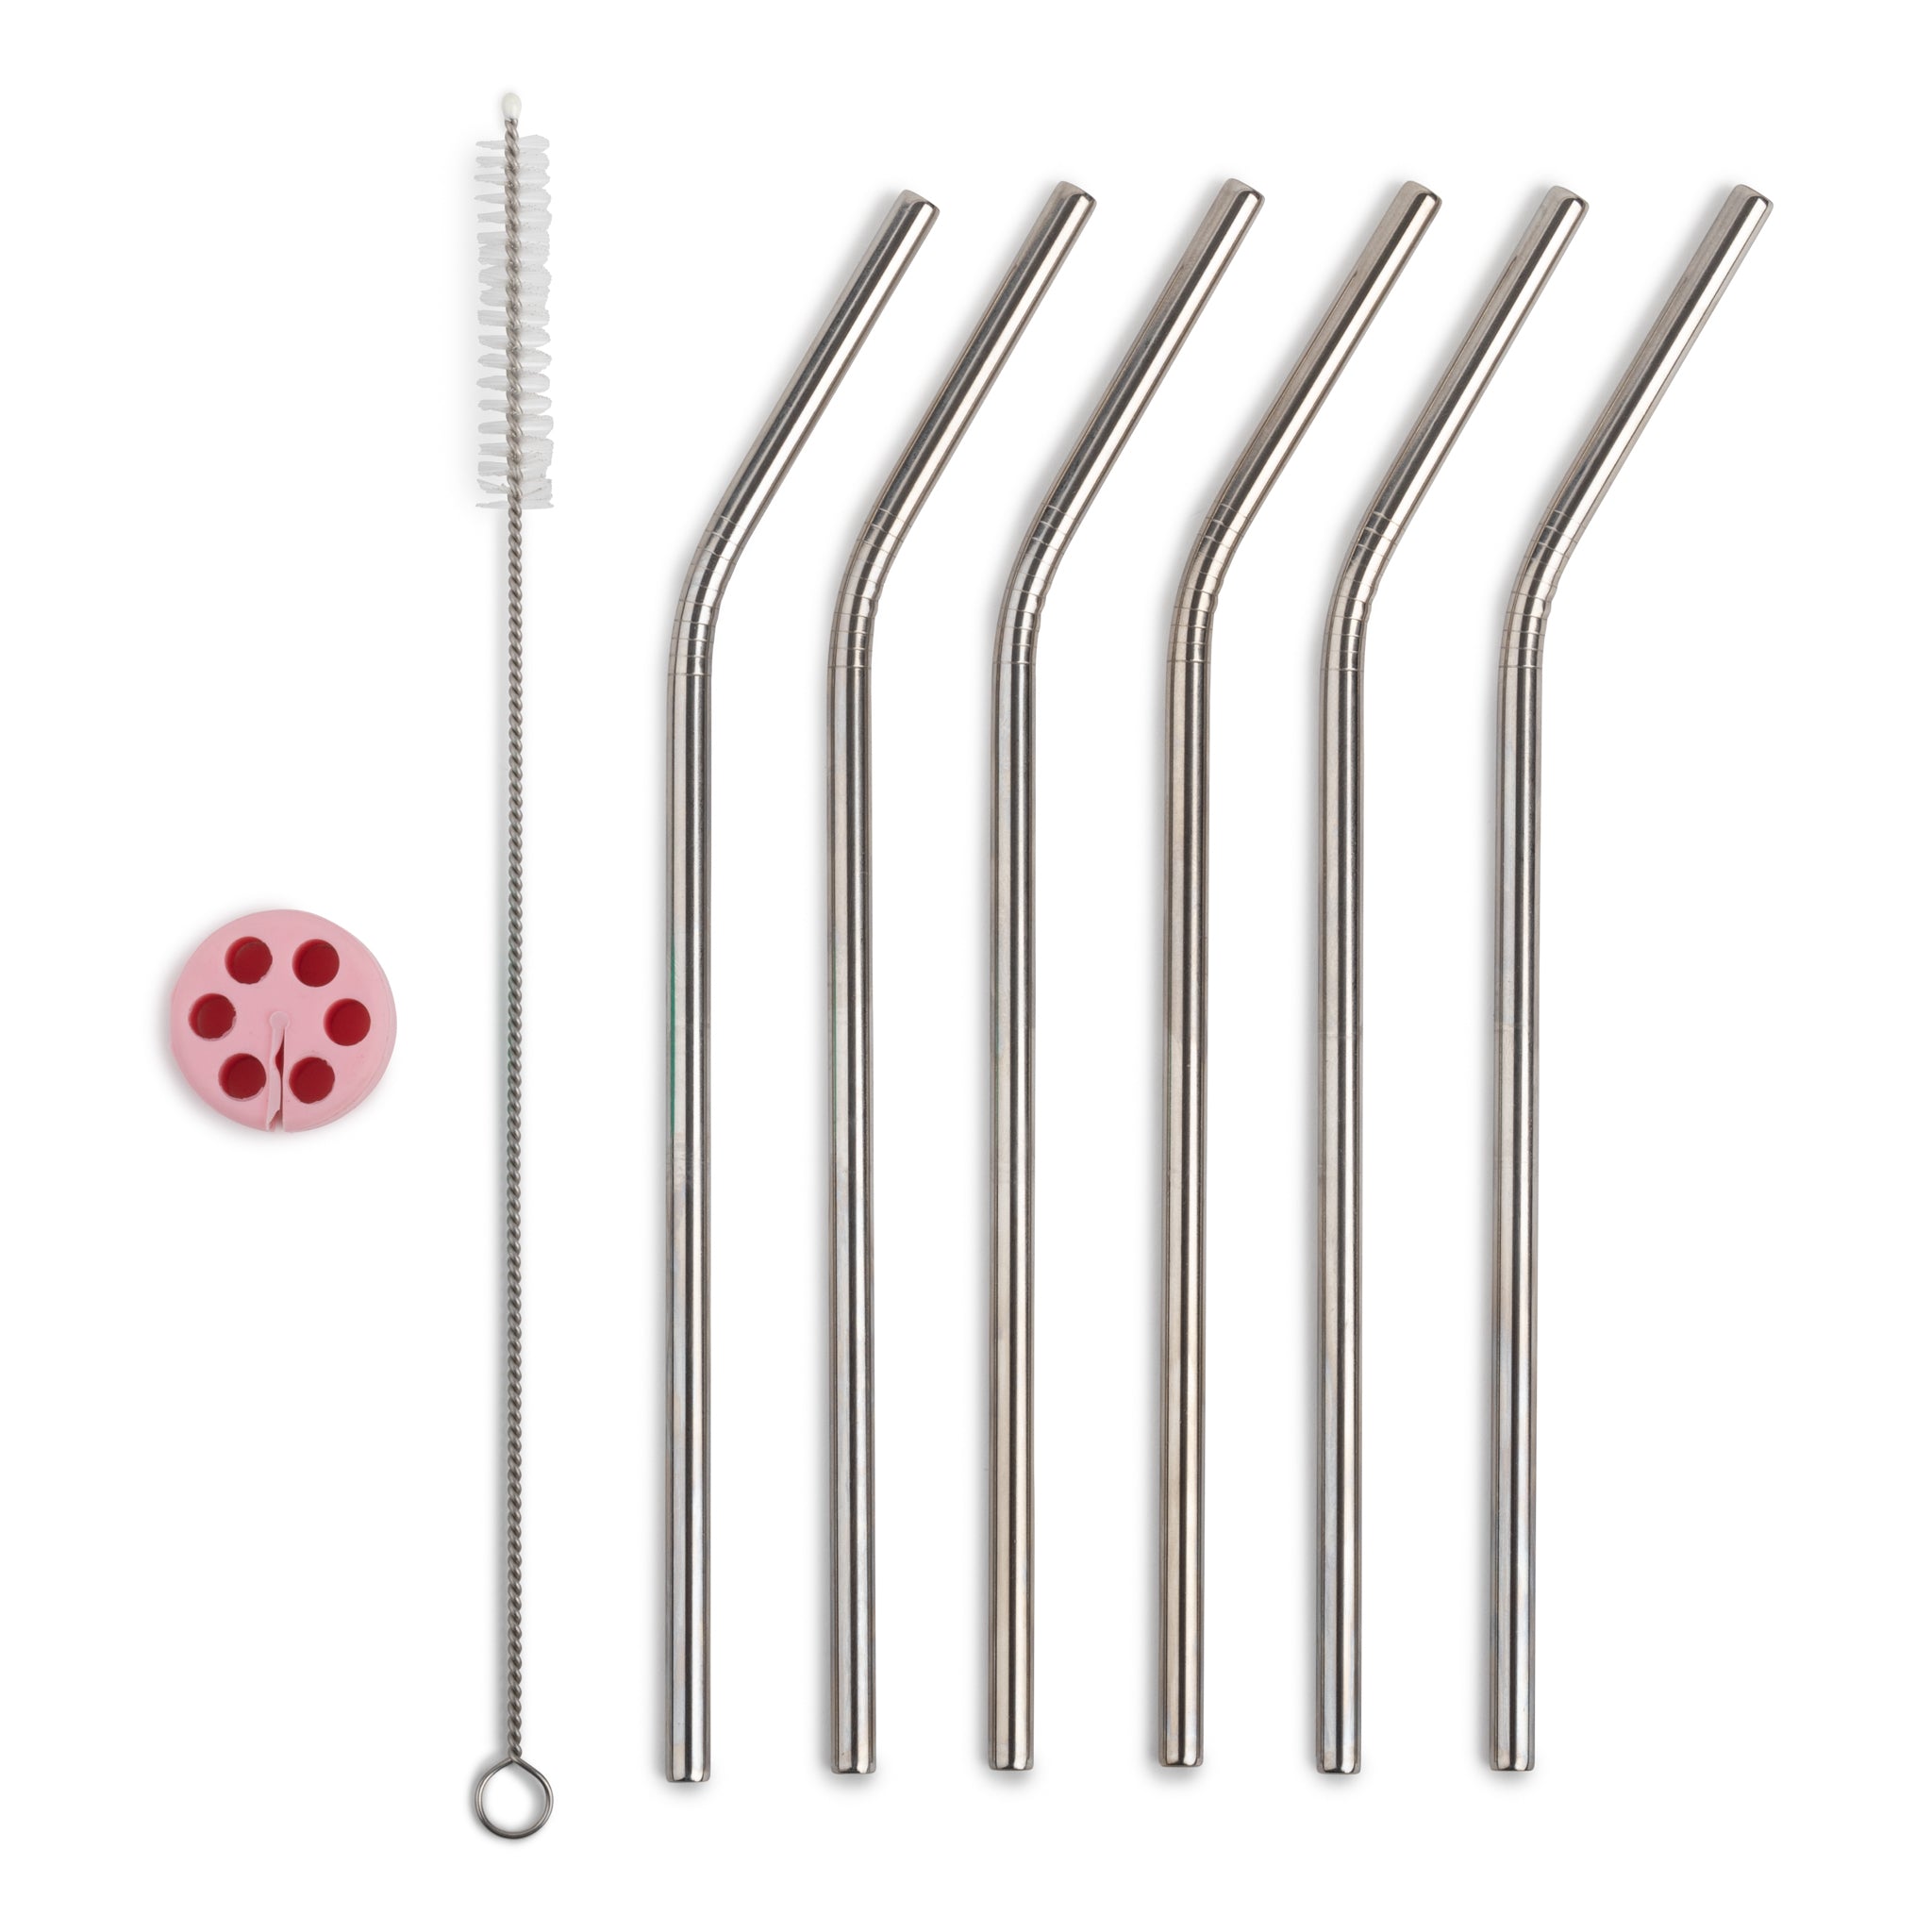 Reusable stainless steel straws